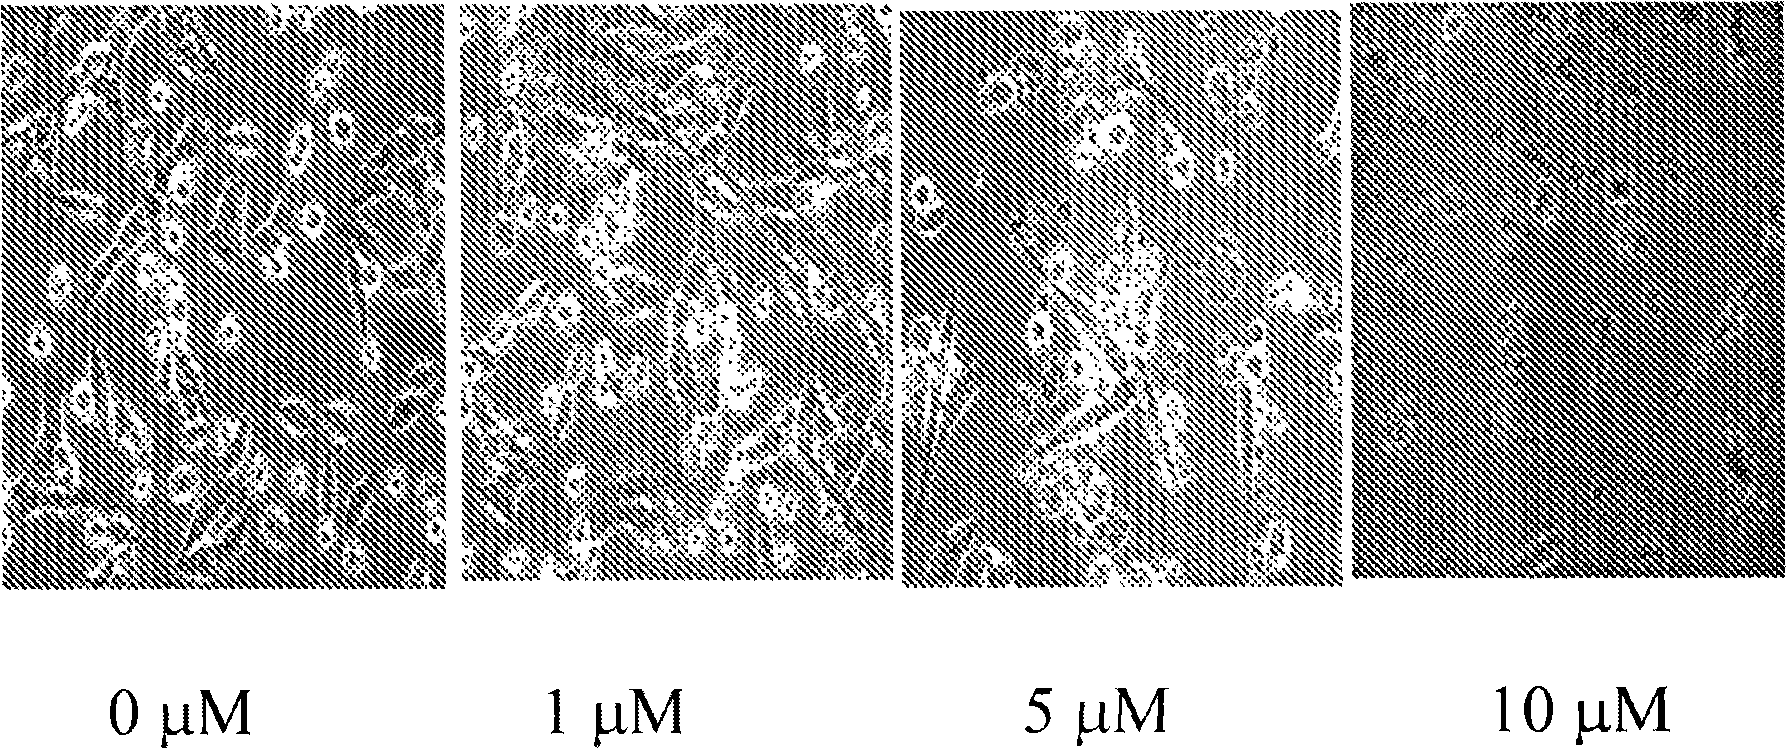 Compounds and methods for treating estrogen receptor-related diseases